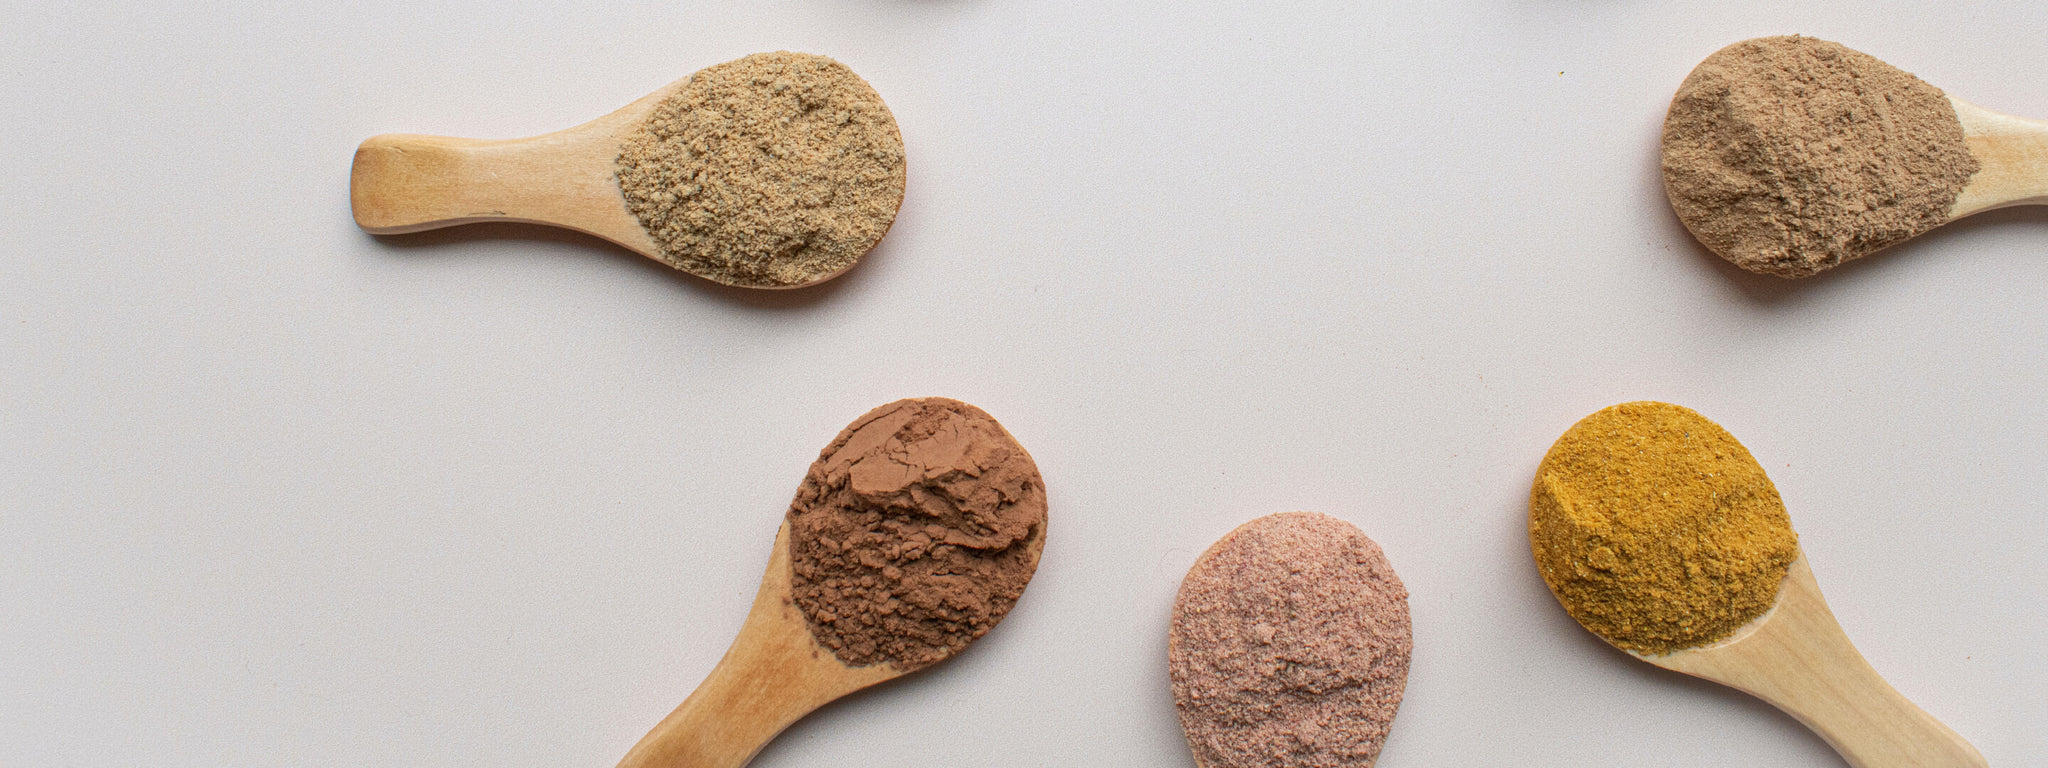 5 of the best organic and sustainable protein powders